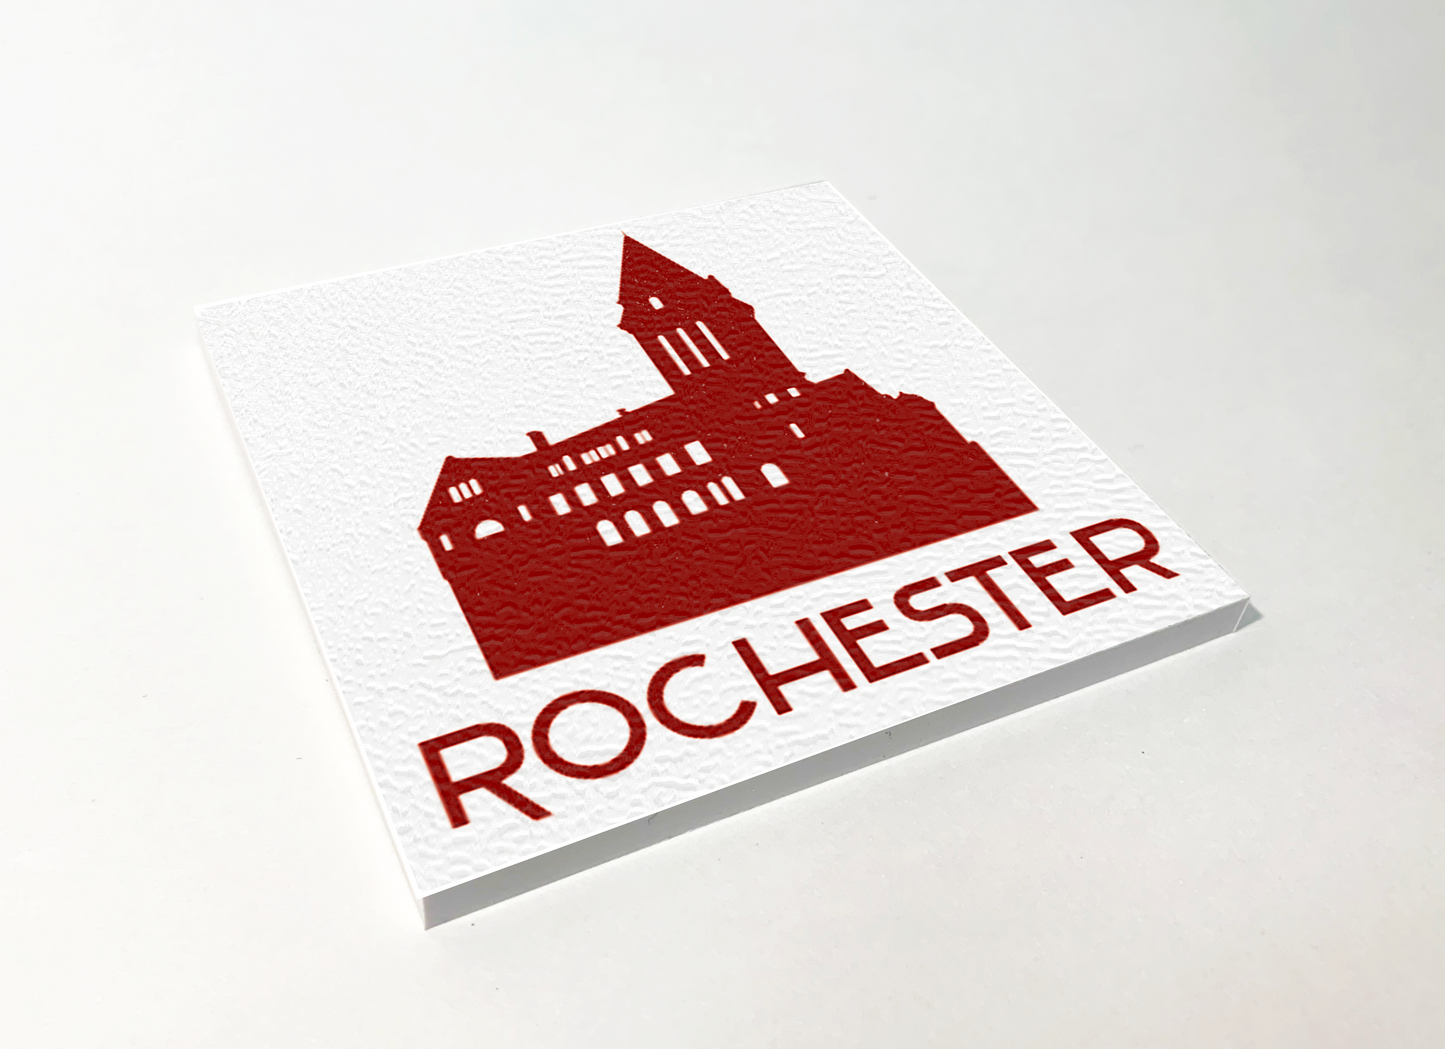 Rochester City Hall Red ABS Plastic Coaster 4 Pack Designed and Handcrafted in Buffalo NY